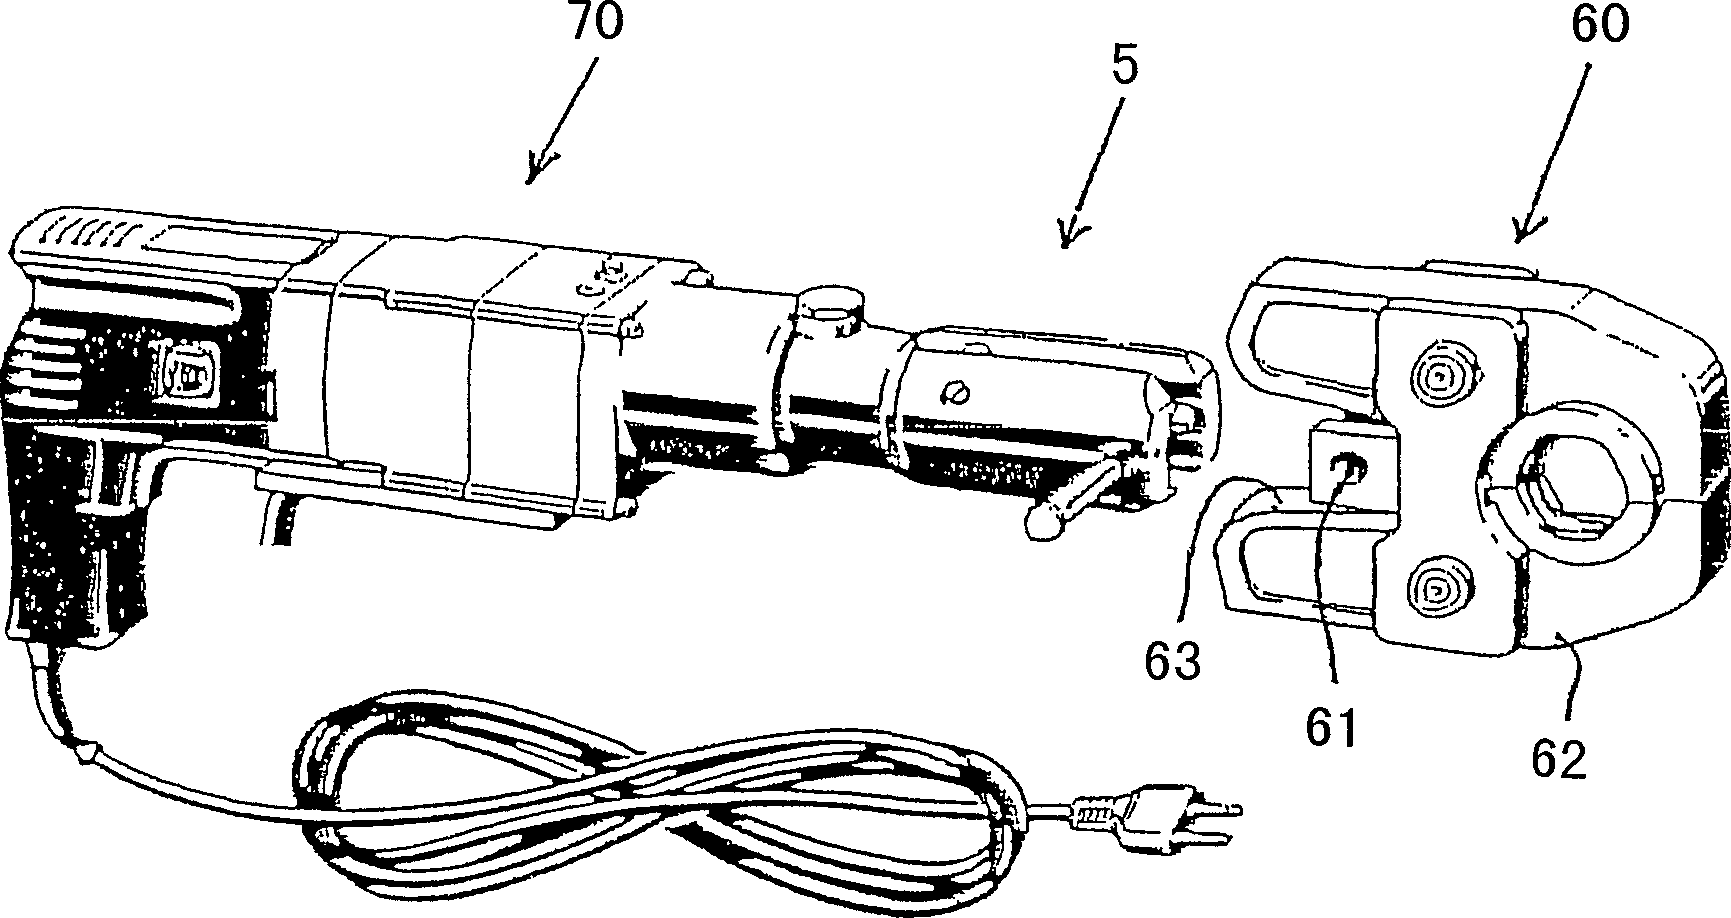 Roll holding unit